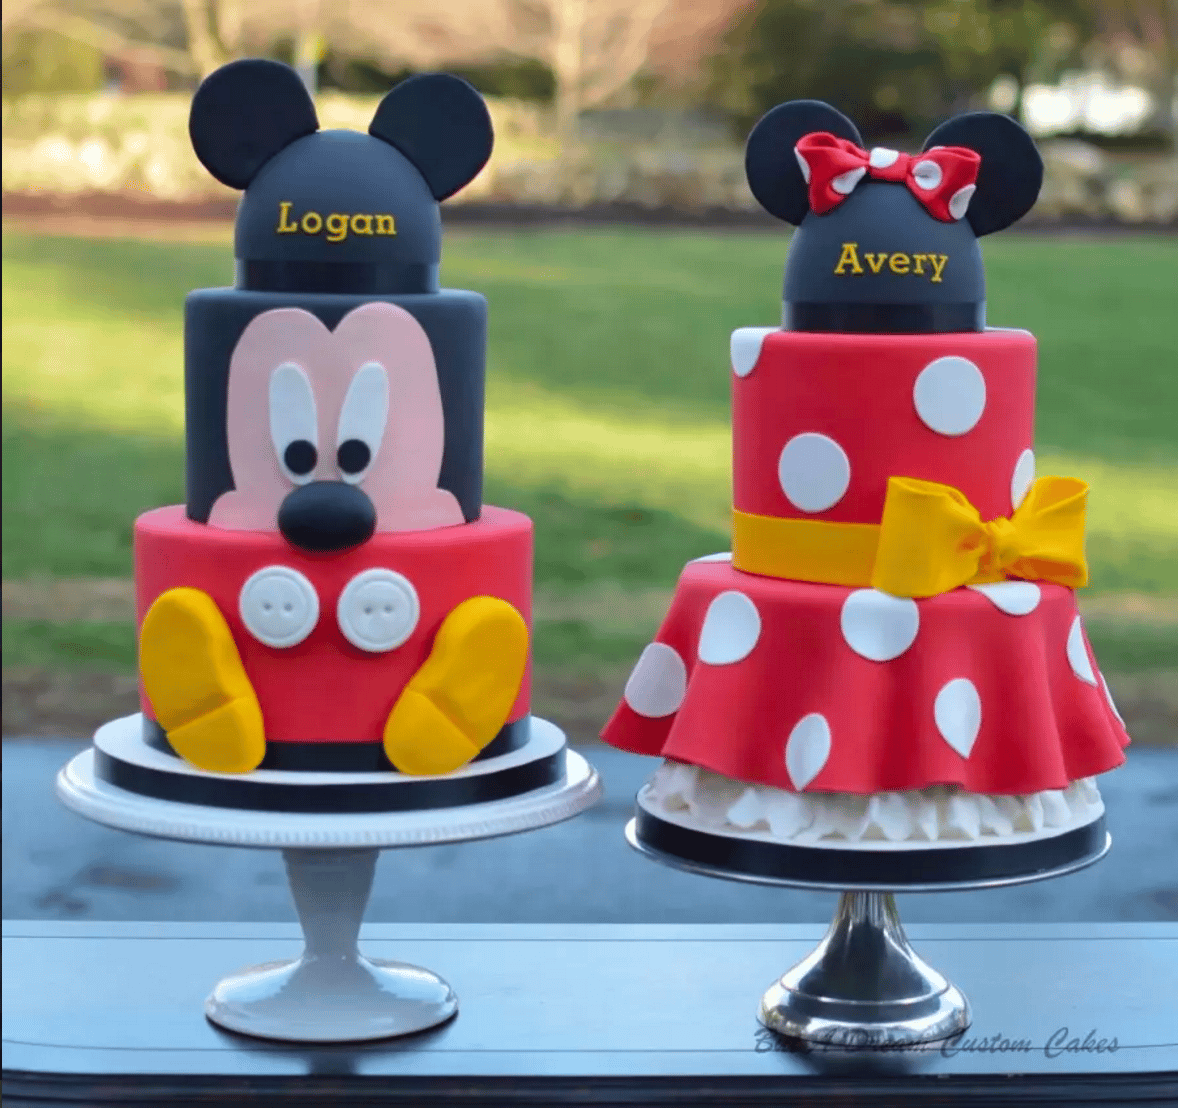 Minnie-mouse-themed birthday party for twins